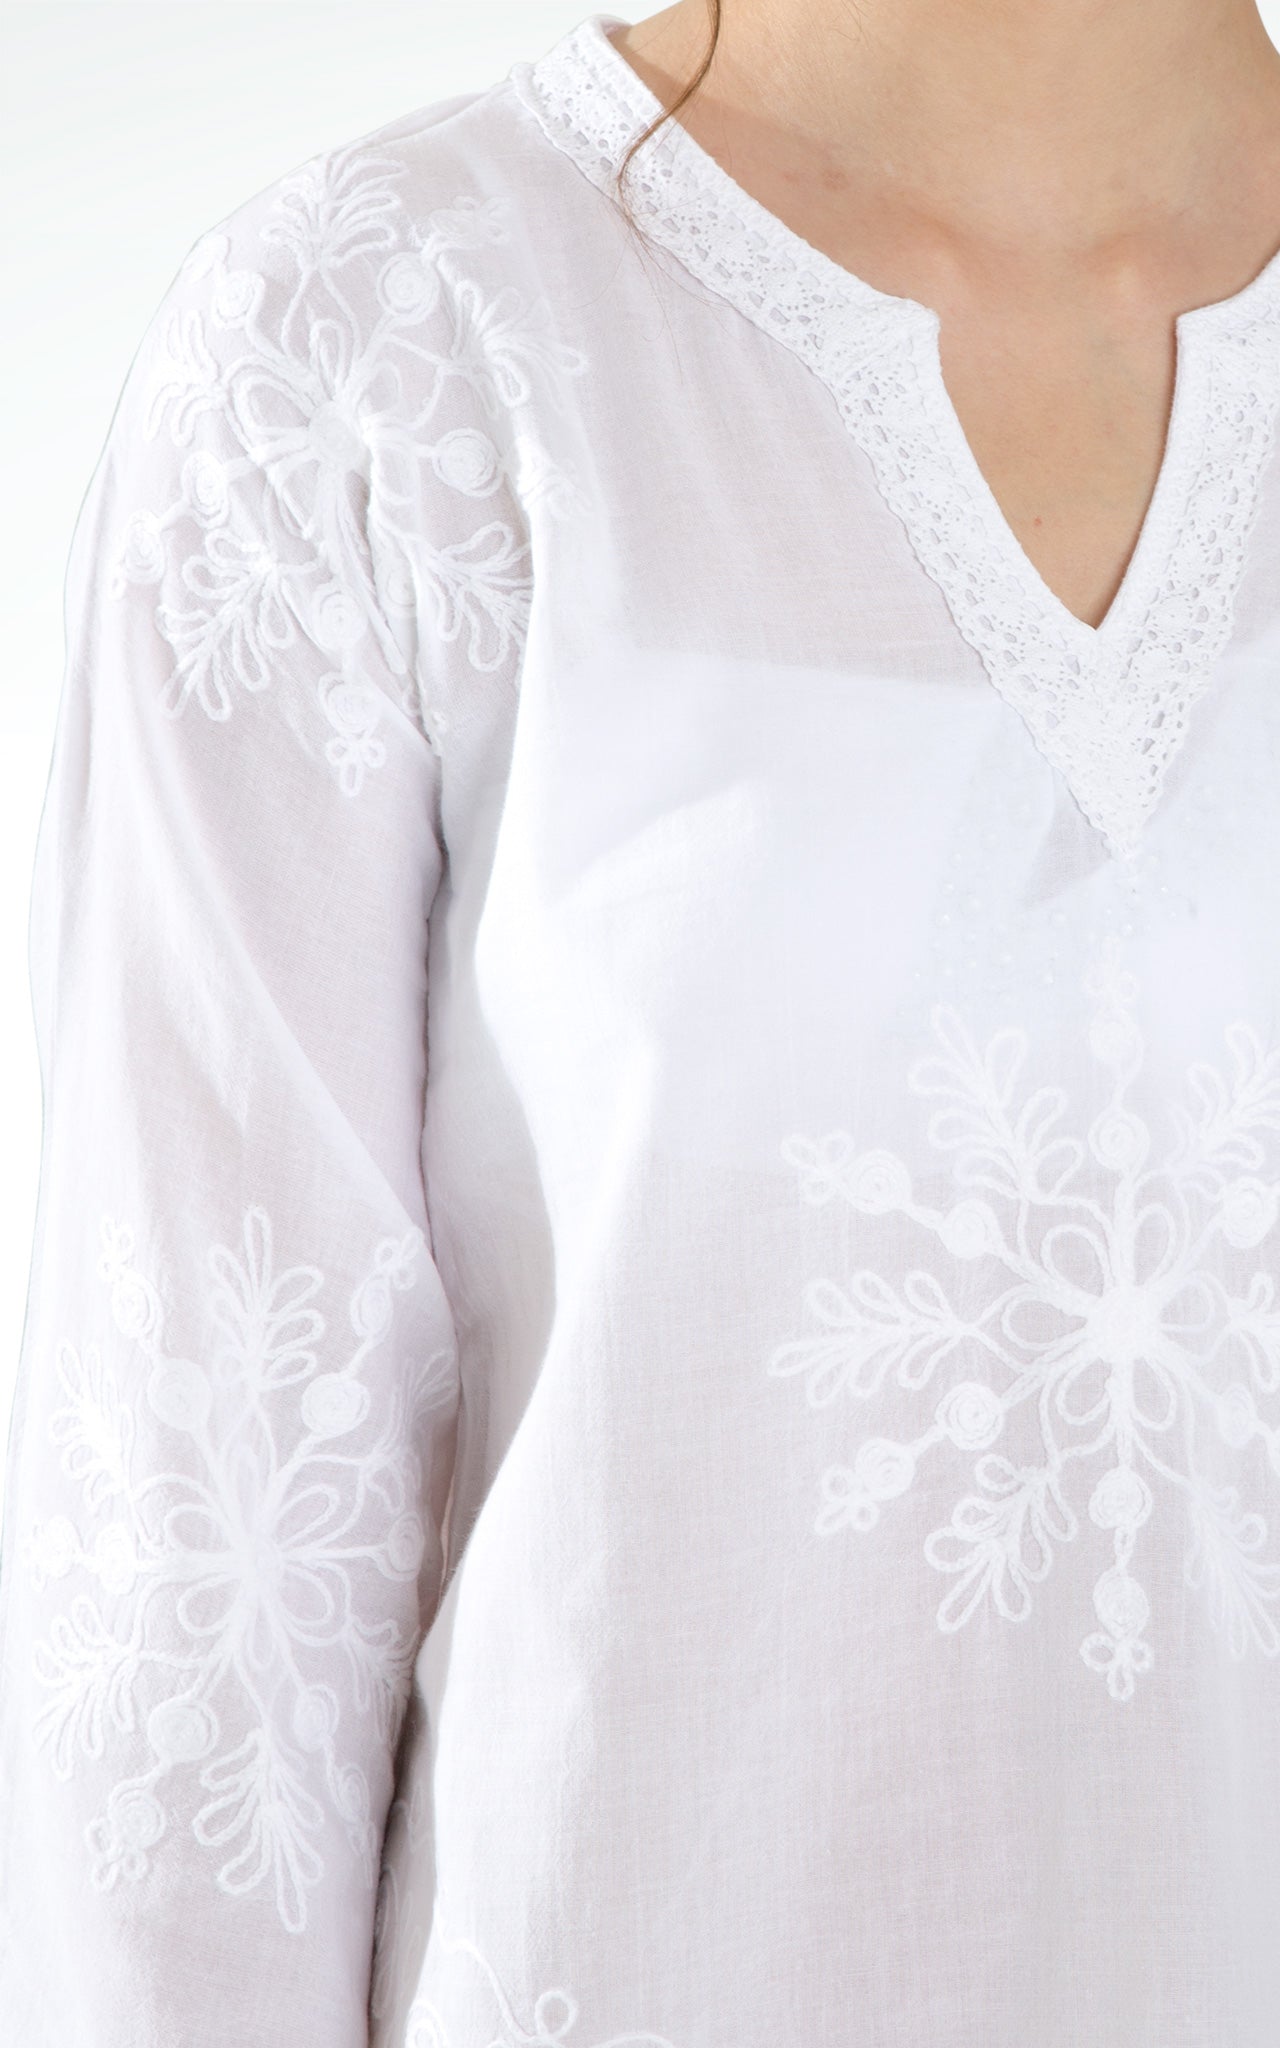 Women's Embroidered Long Sleeves White Cotton Top